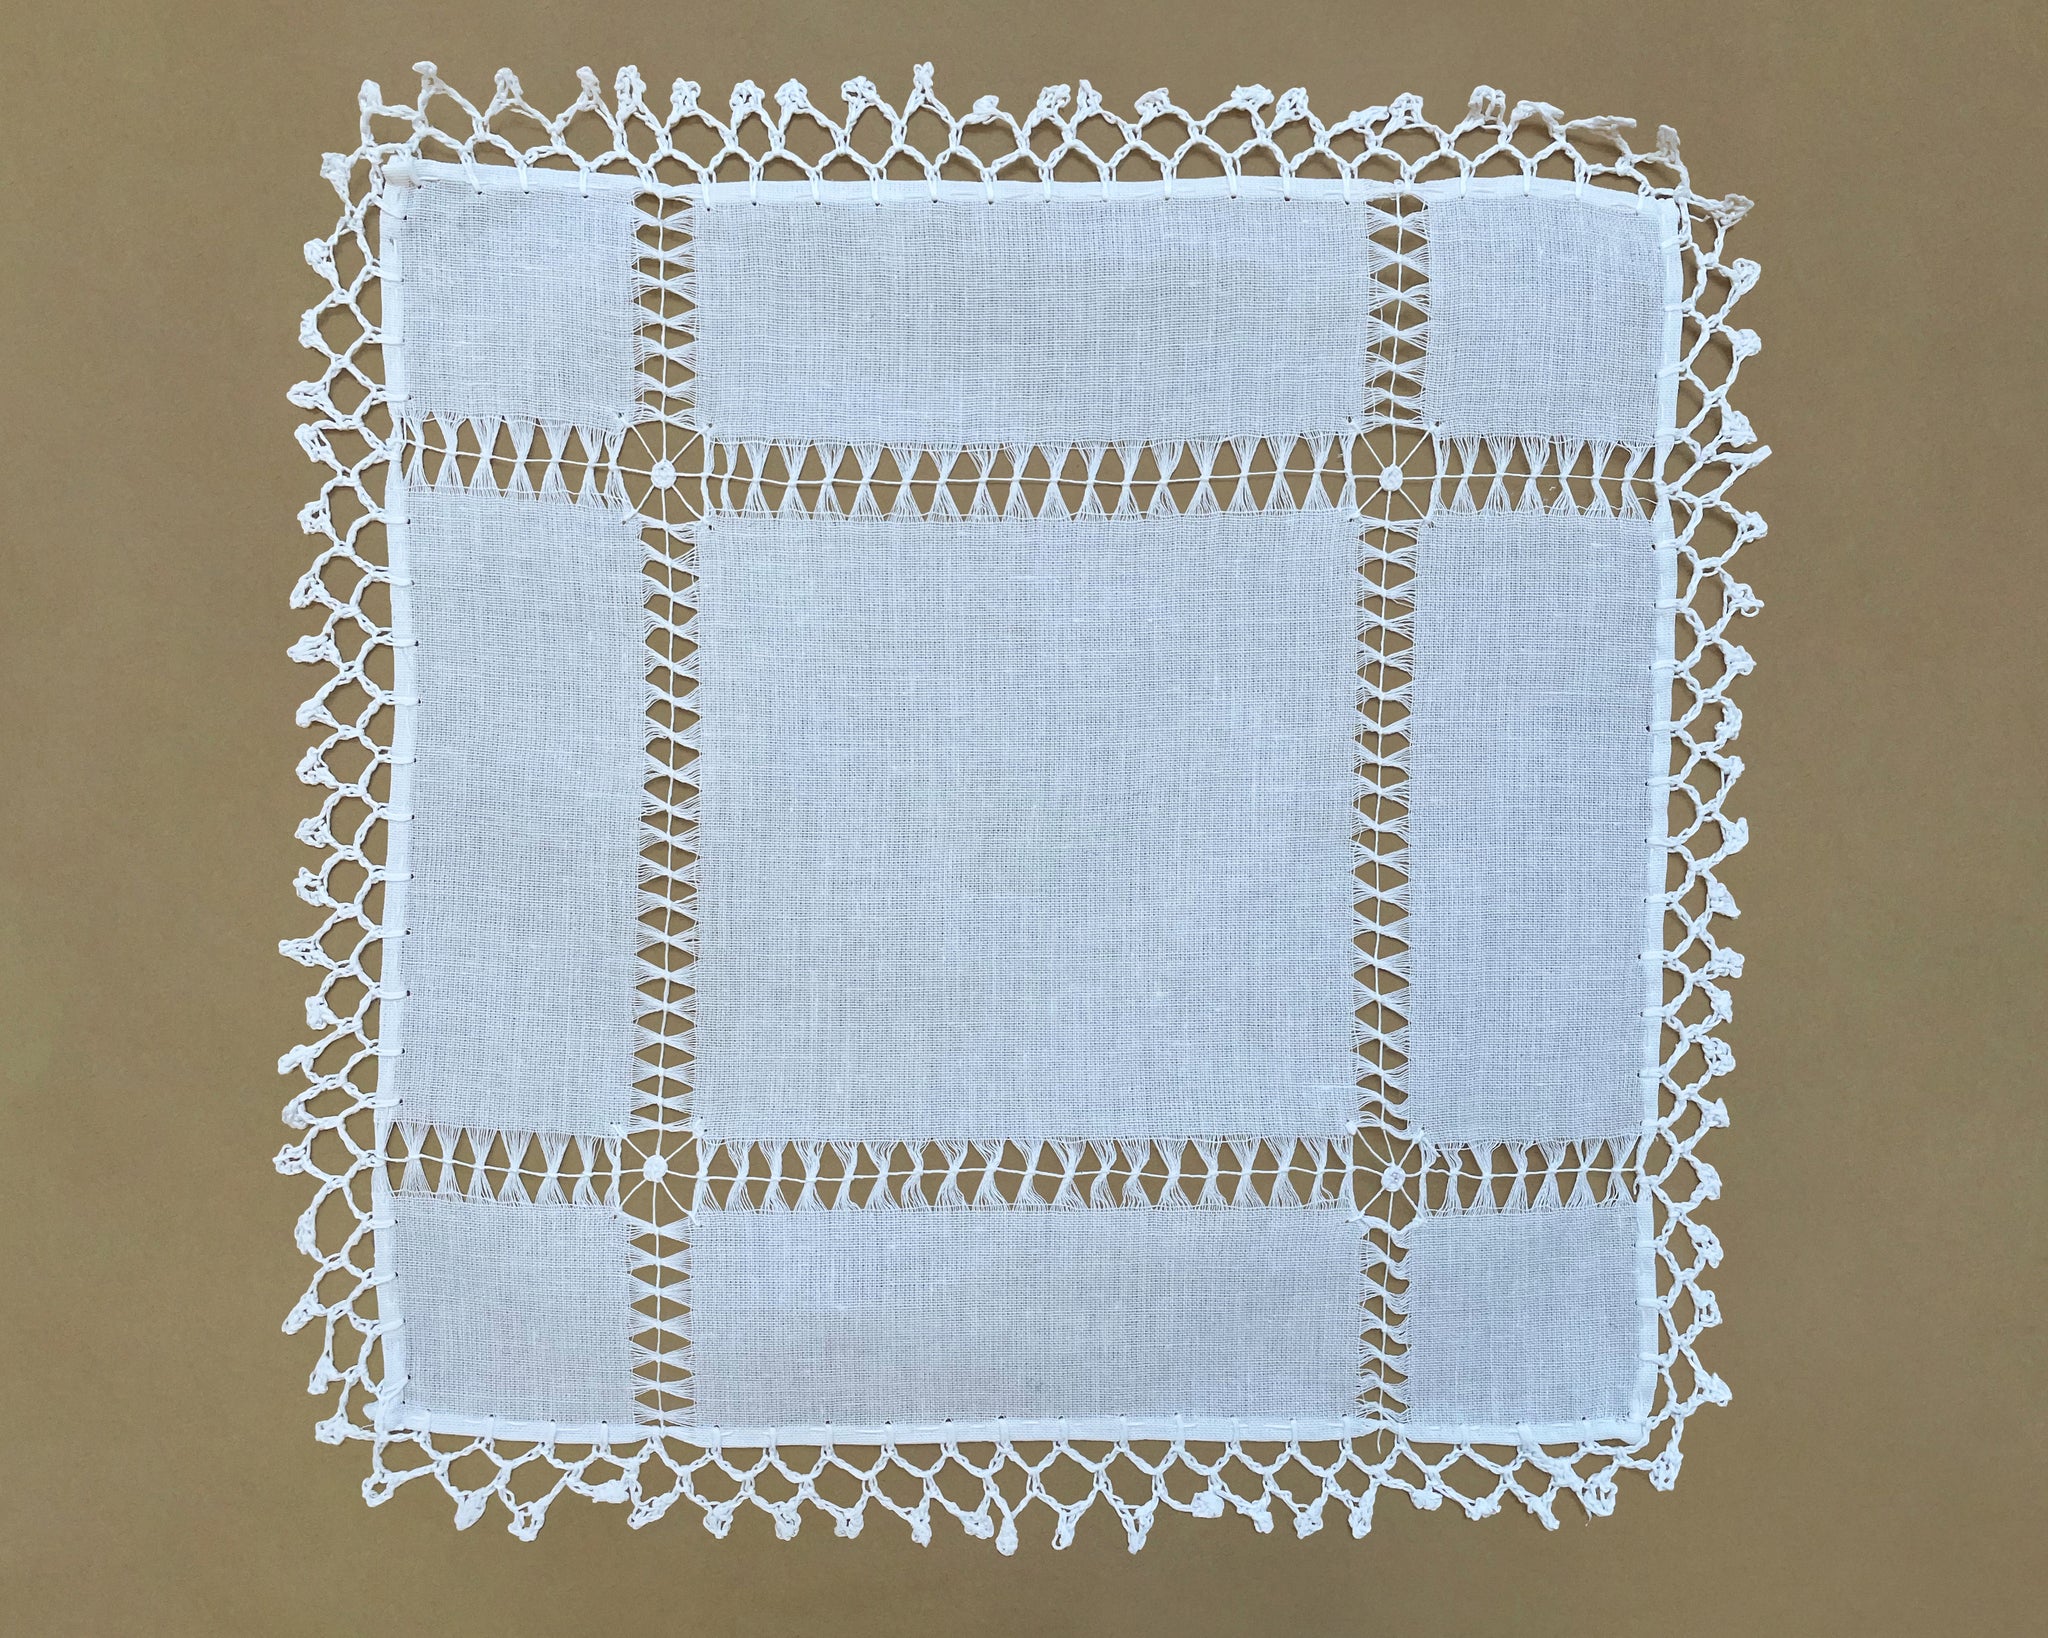 Dorothéa's Embroidered Place Setting - Small